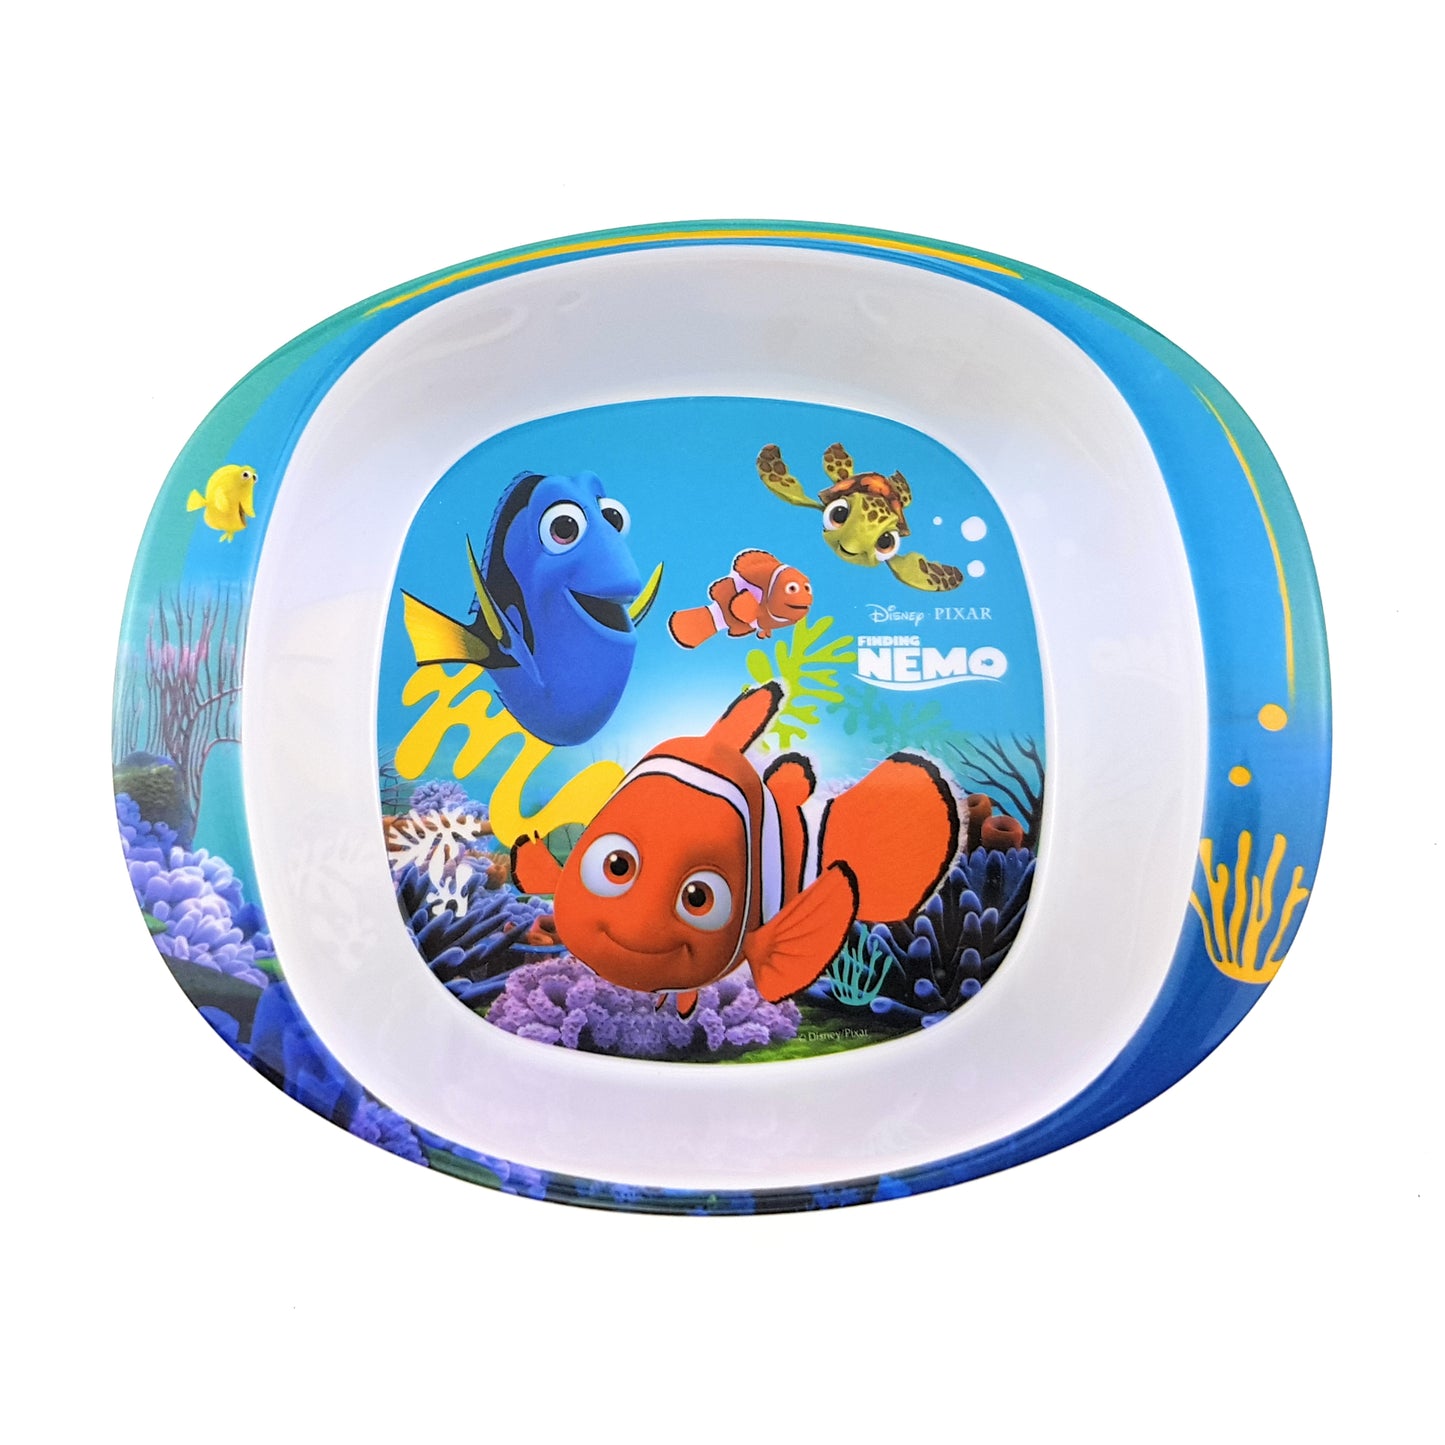 Disney Finding Nemo and Dory - Tableware, Bowl | Plate | Cup | Spoon | Fork (Different Items Available)